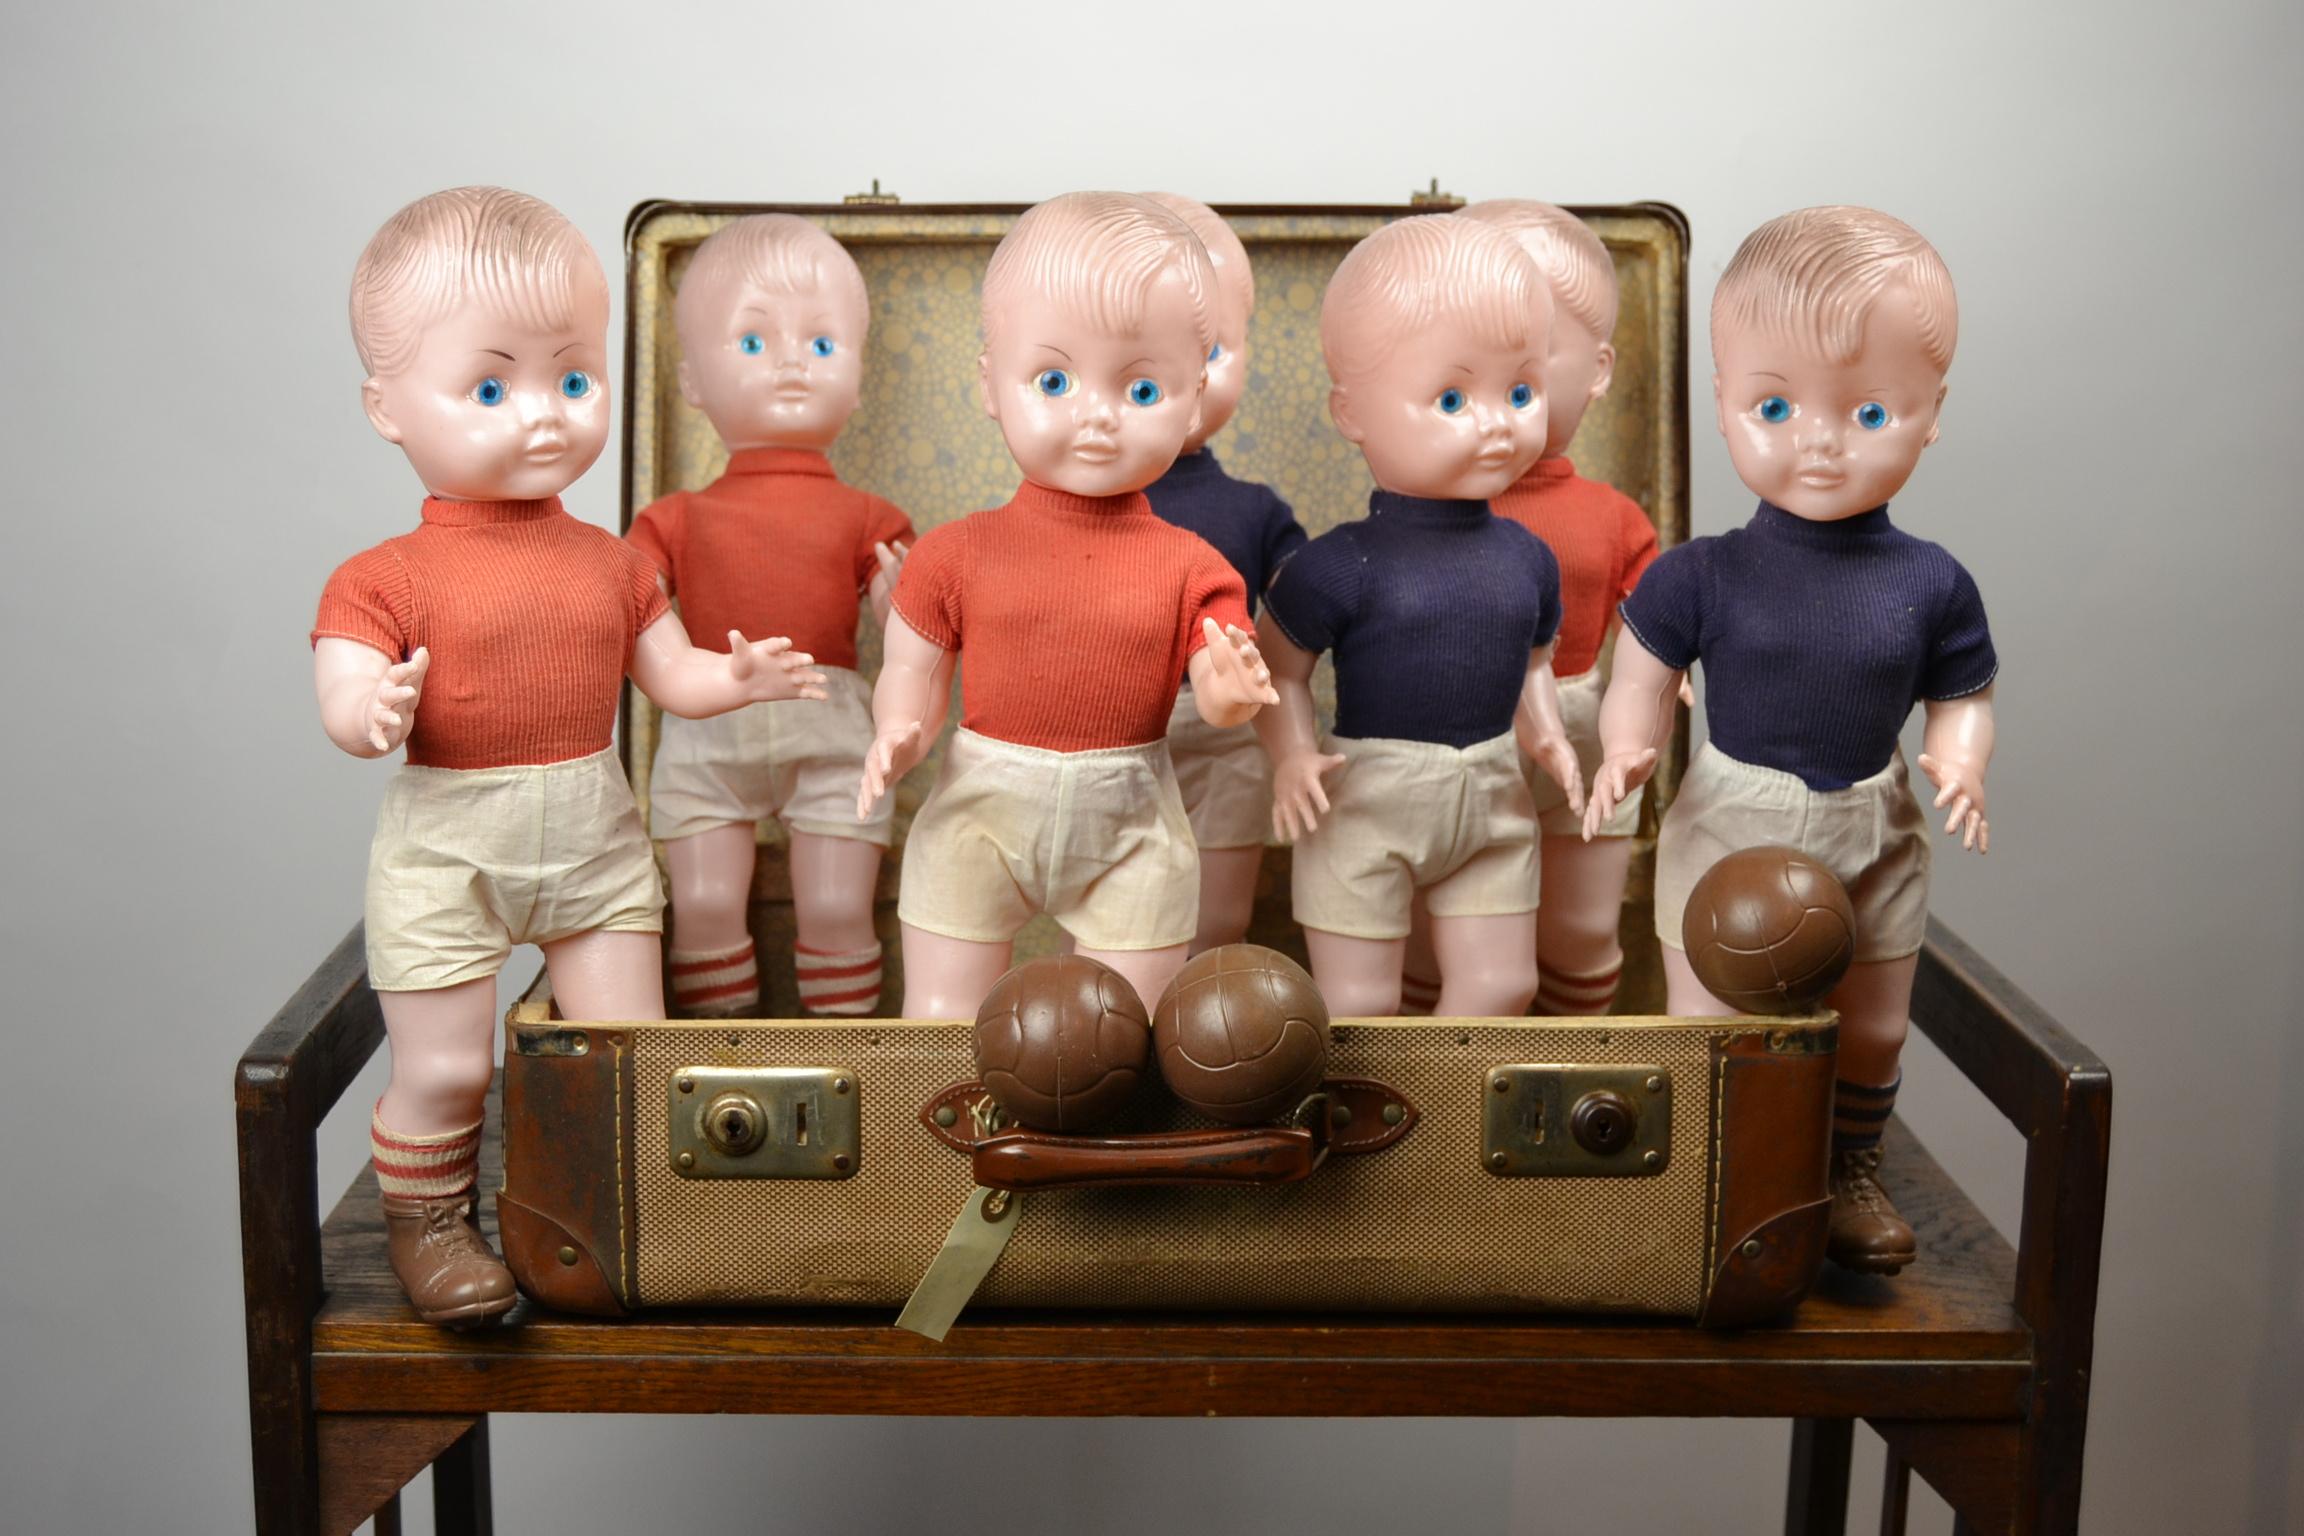 1960s large hard plastic dolls dressed in football outfit, soccer clothes.
These vintage dolls look adorable with their big blue eyes.
They have movable heads, arms and legs.
We have 7 pieces available: 4 with red and white outfit and 3 with a